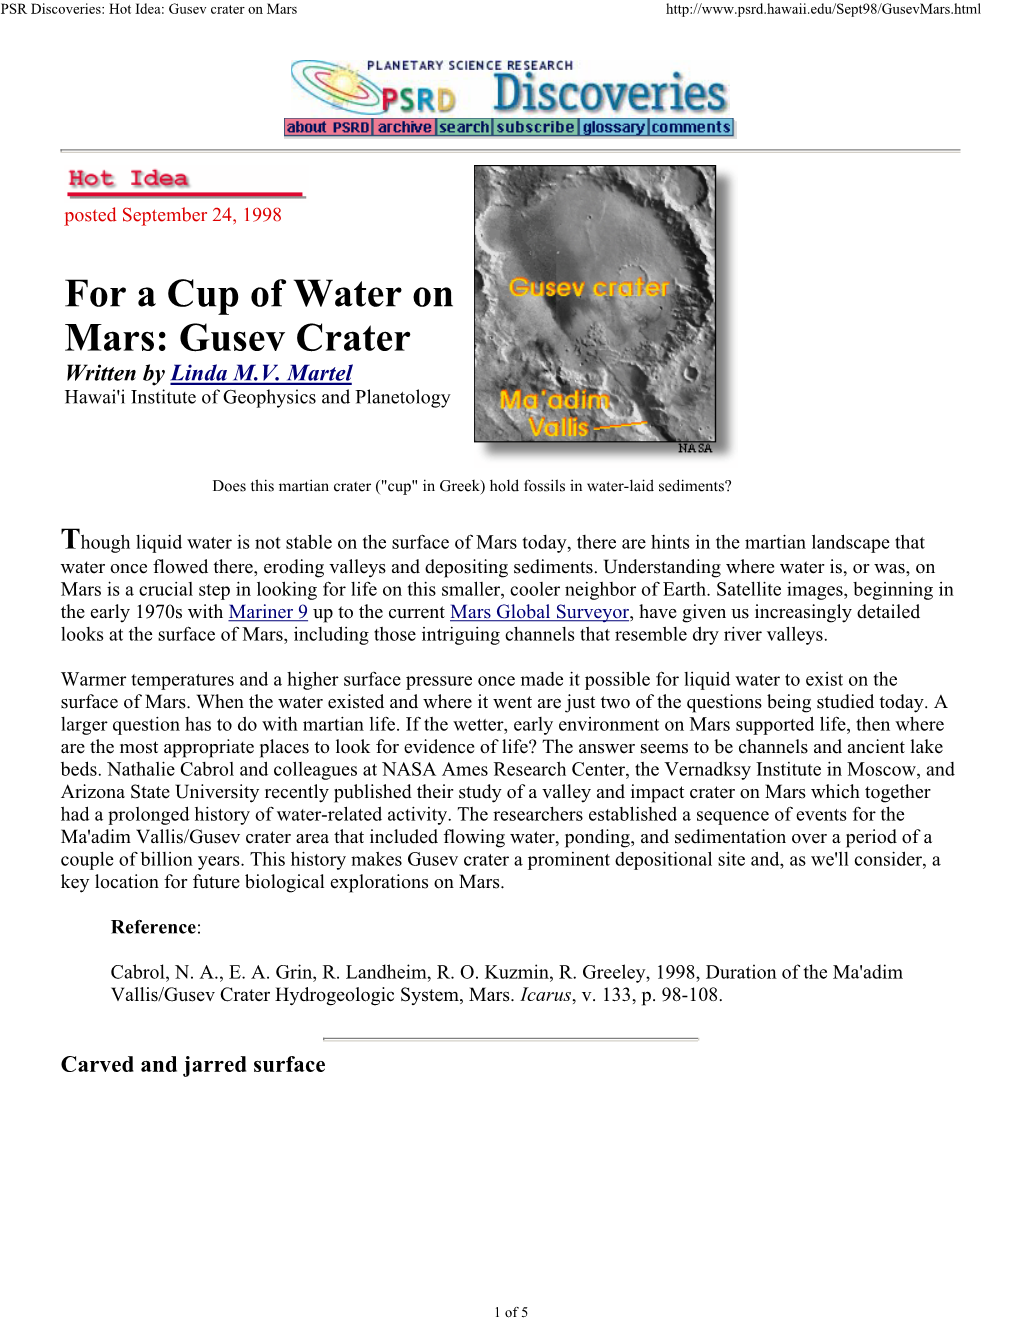 For a Cup of Water on Mars: Gusev Crater Written by Linda M.V